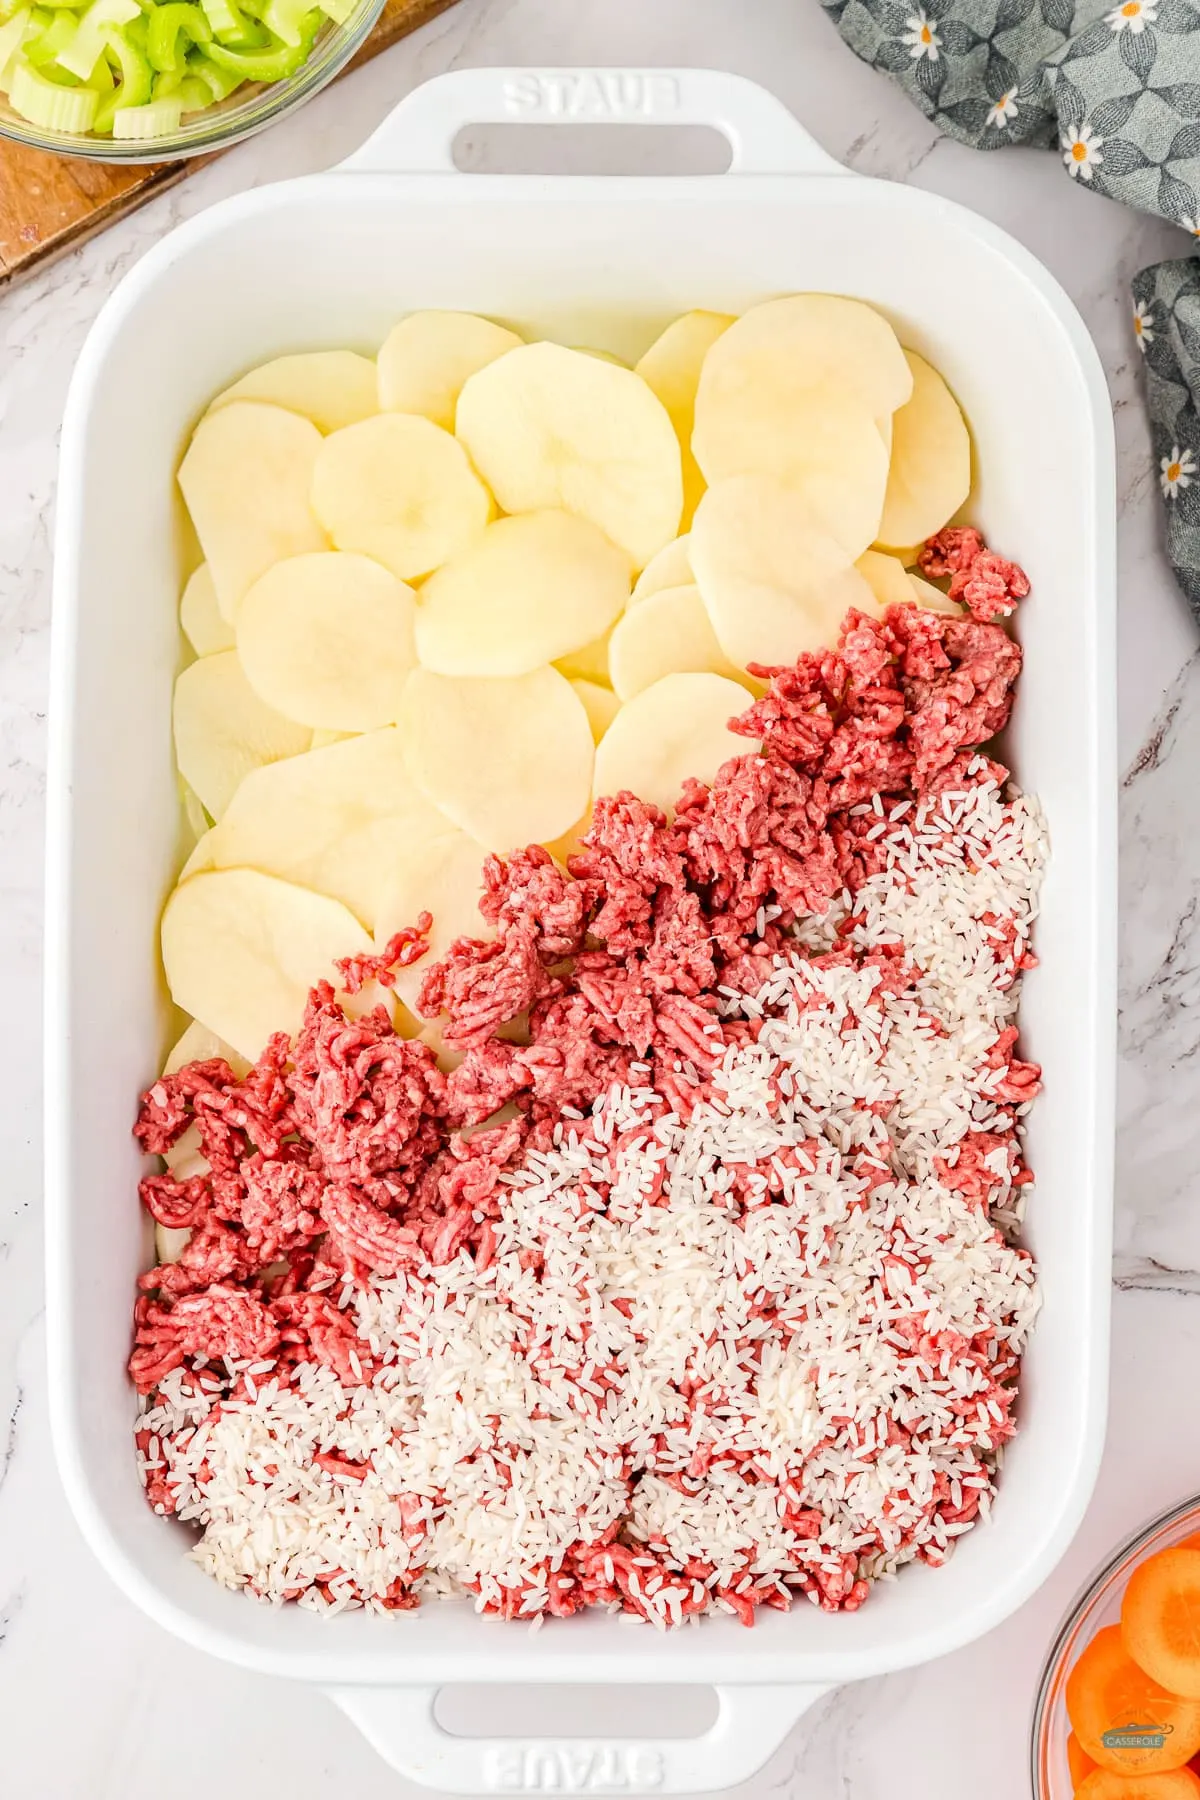 rice layered on beef and potatoes